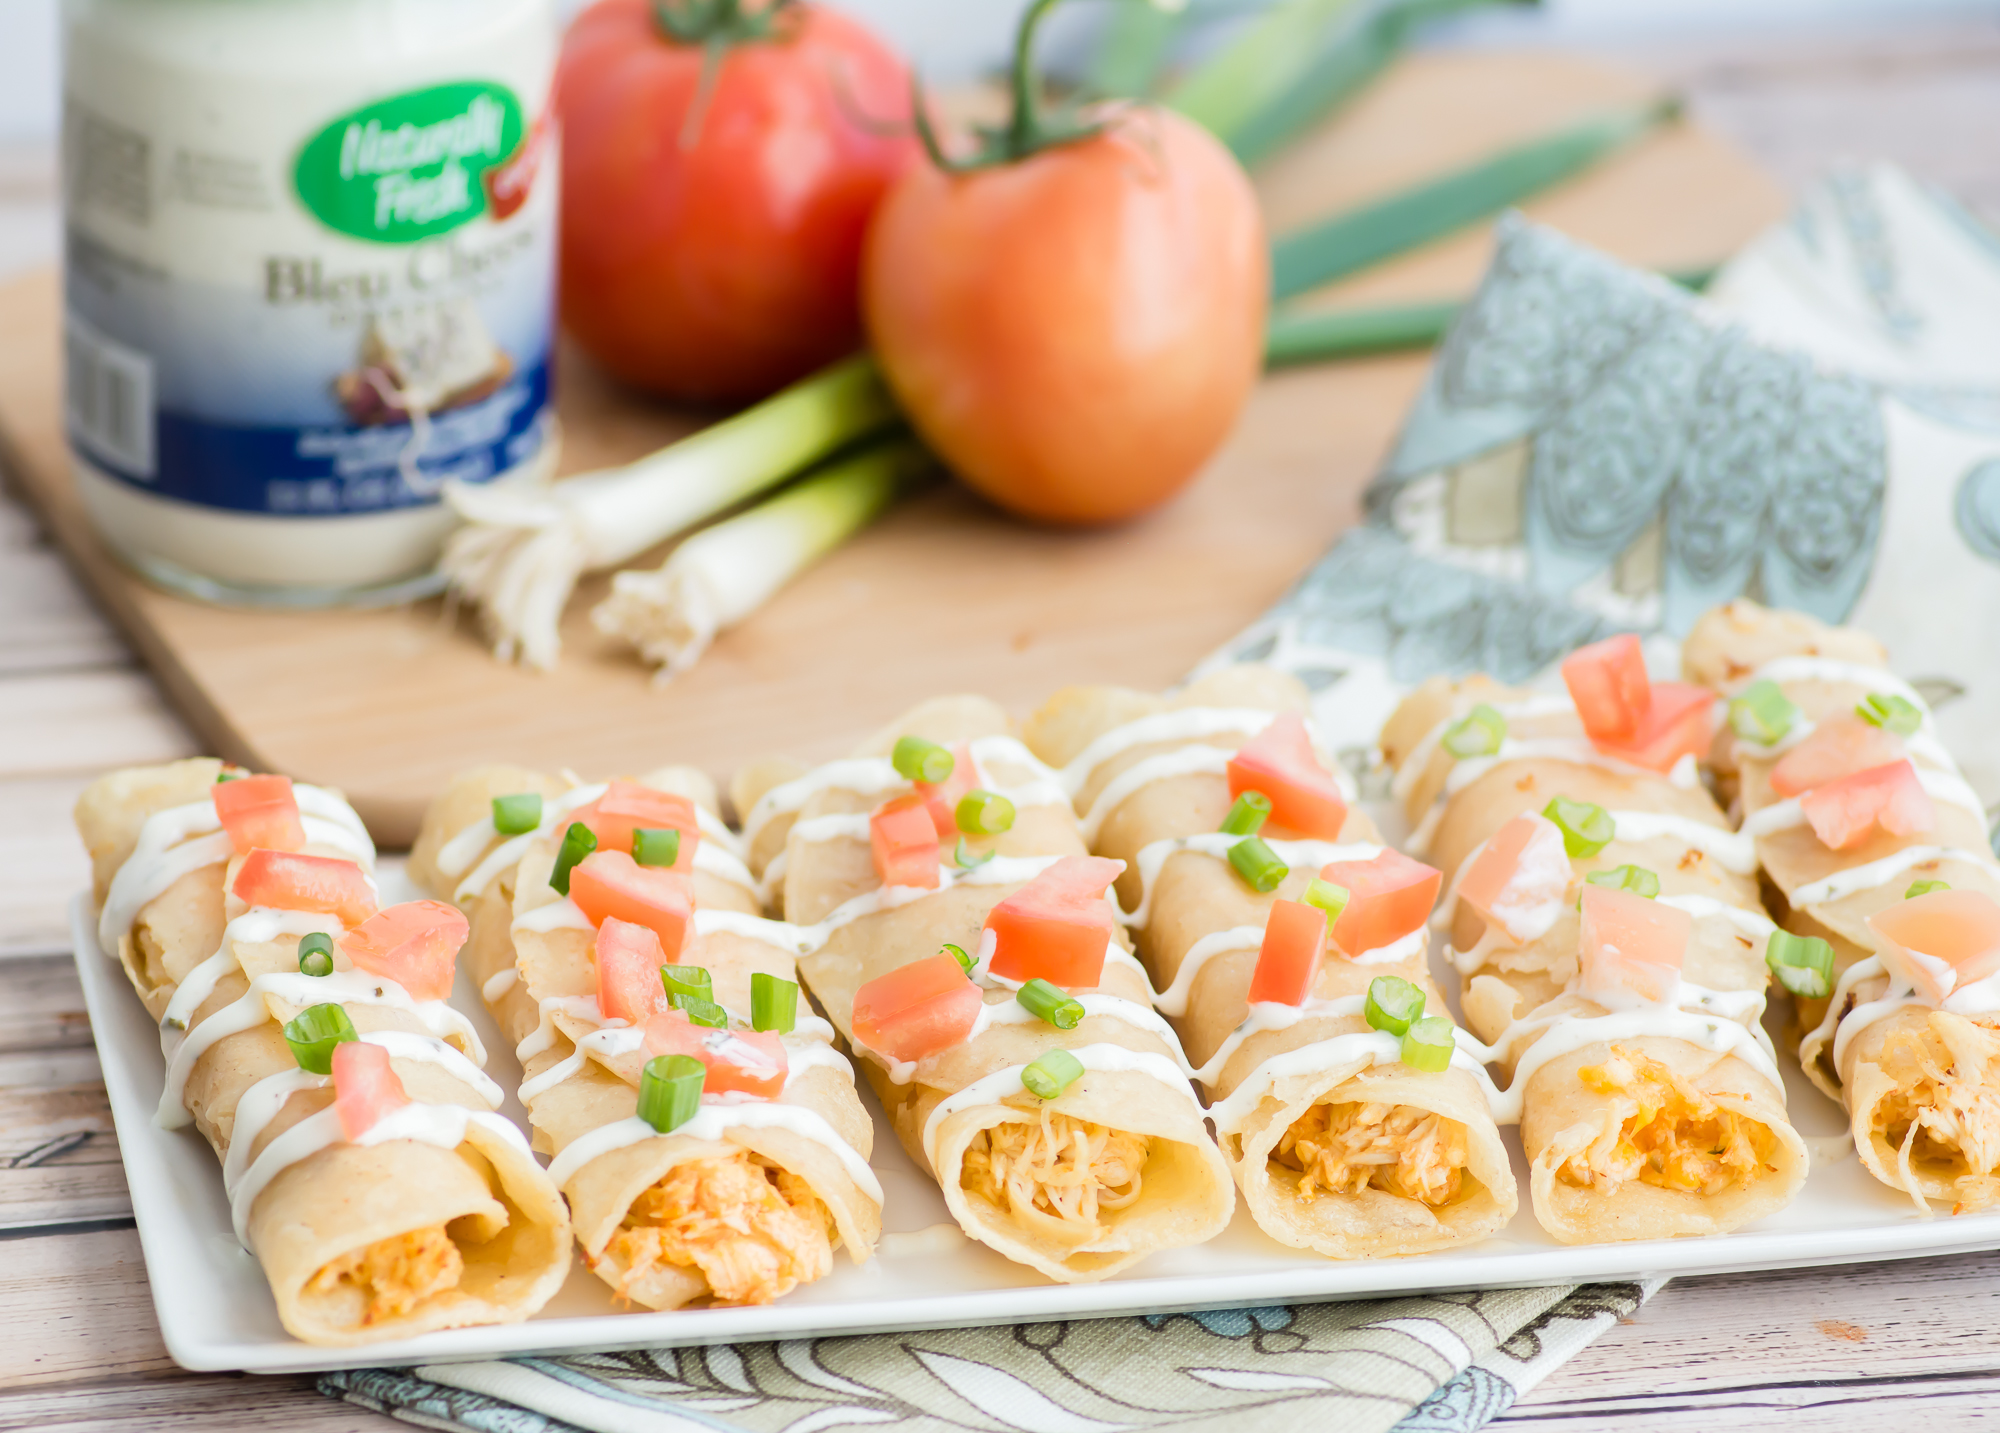 Kick up your appetizer game with these zesty Buffalo Chicken Taquitos. A perfect snack for the big game or just to satisfy a random buffalo chicken craving. Either way, you are going to love this buffalo chicken recipe!